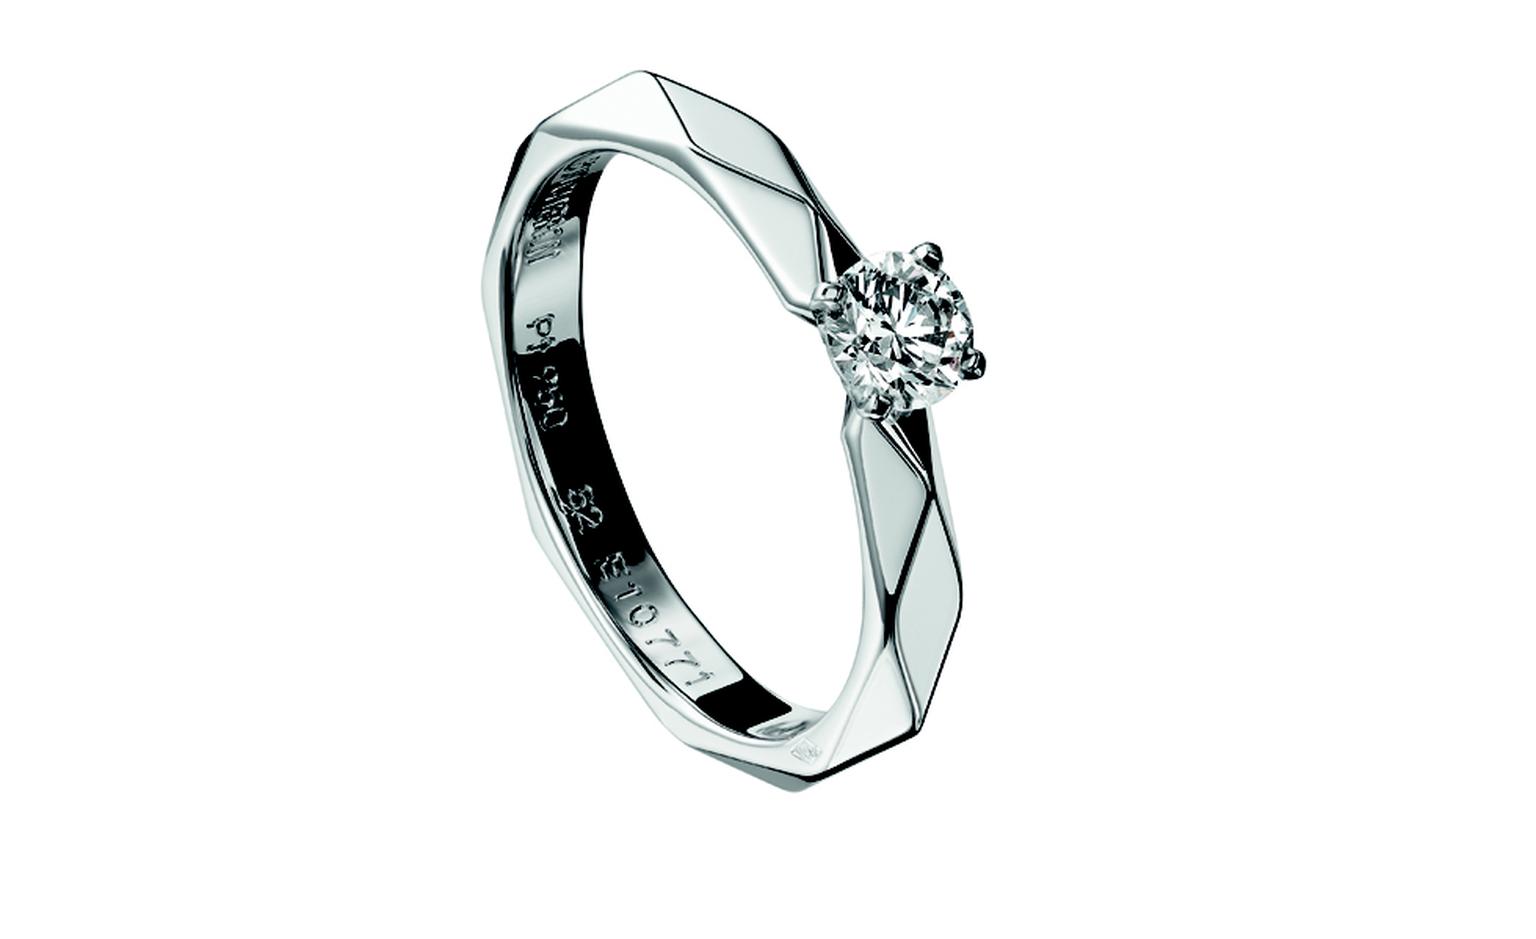 BOUCHERON, Facette Solitaire in white gold. Price from £7,900